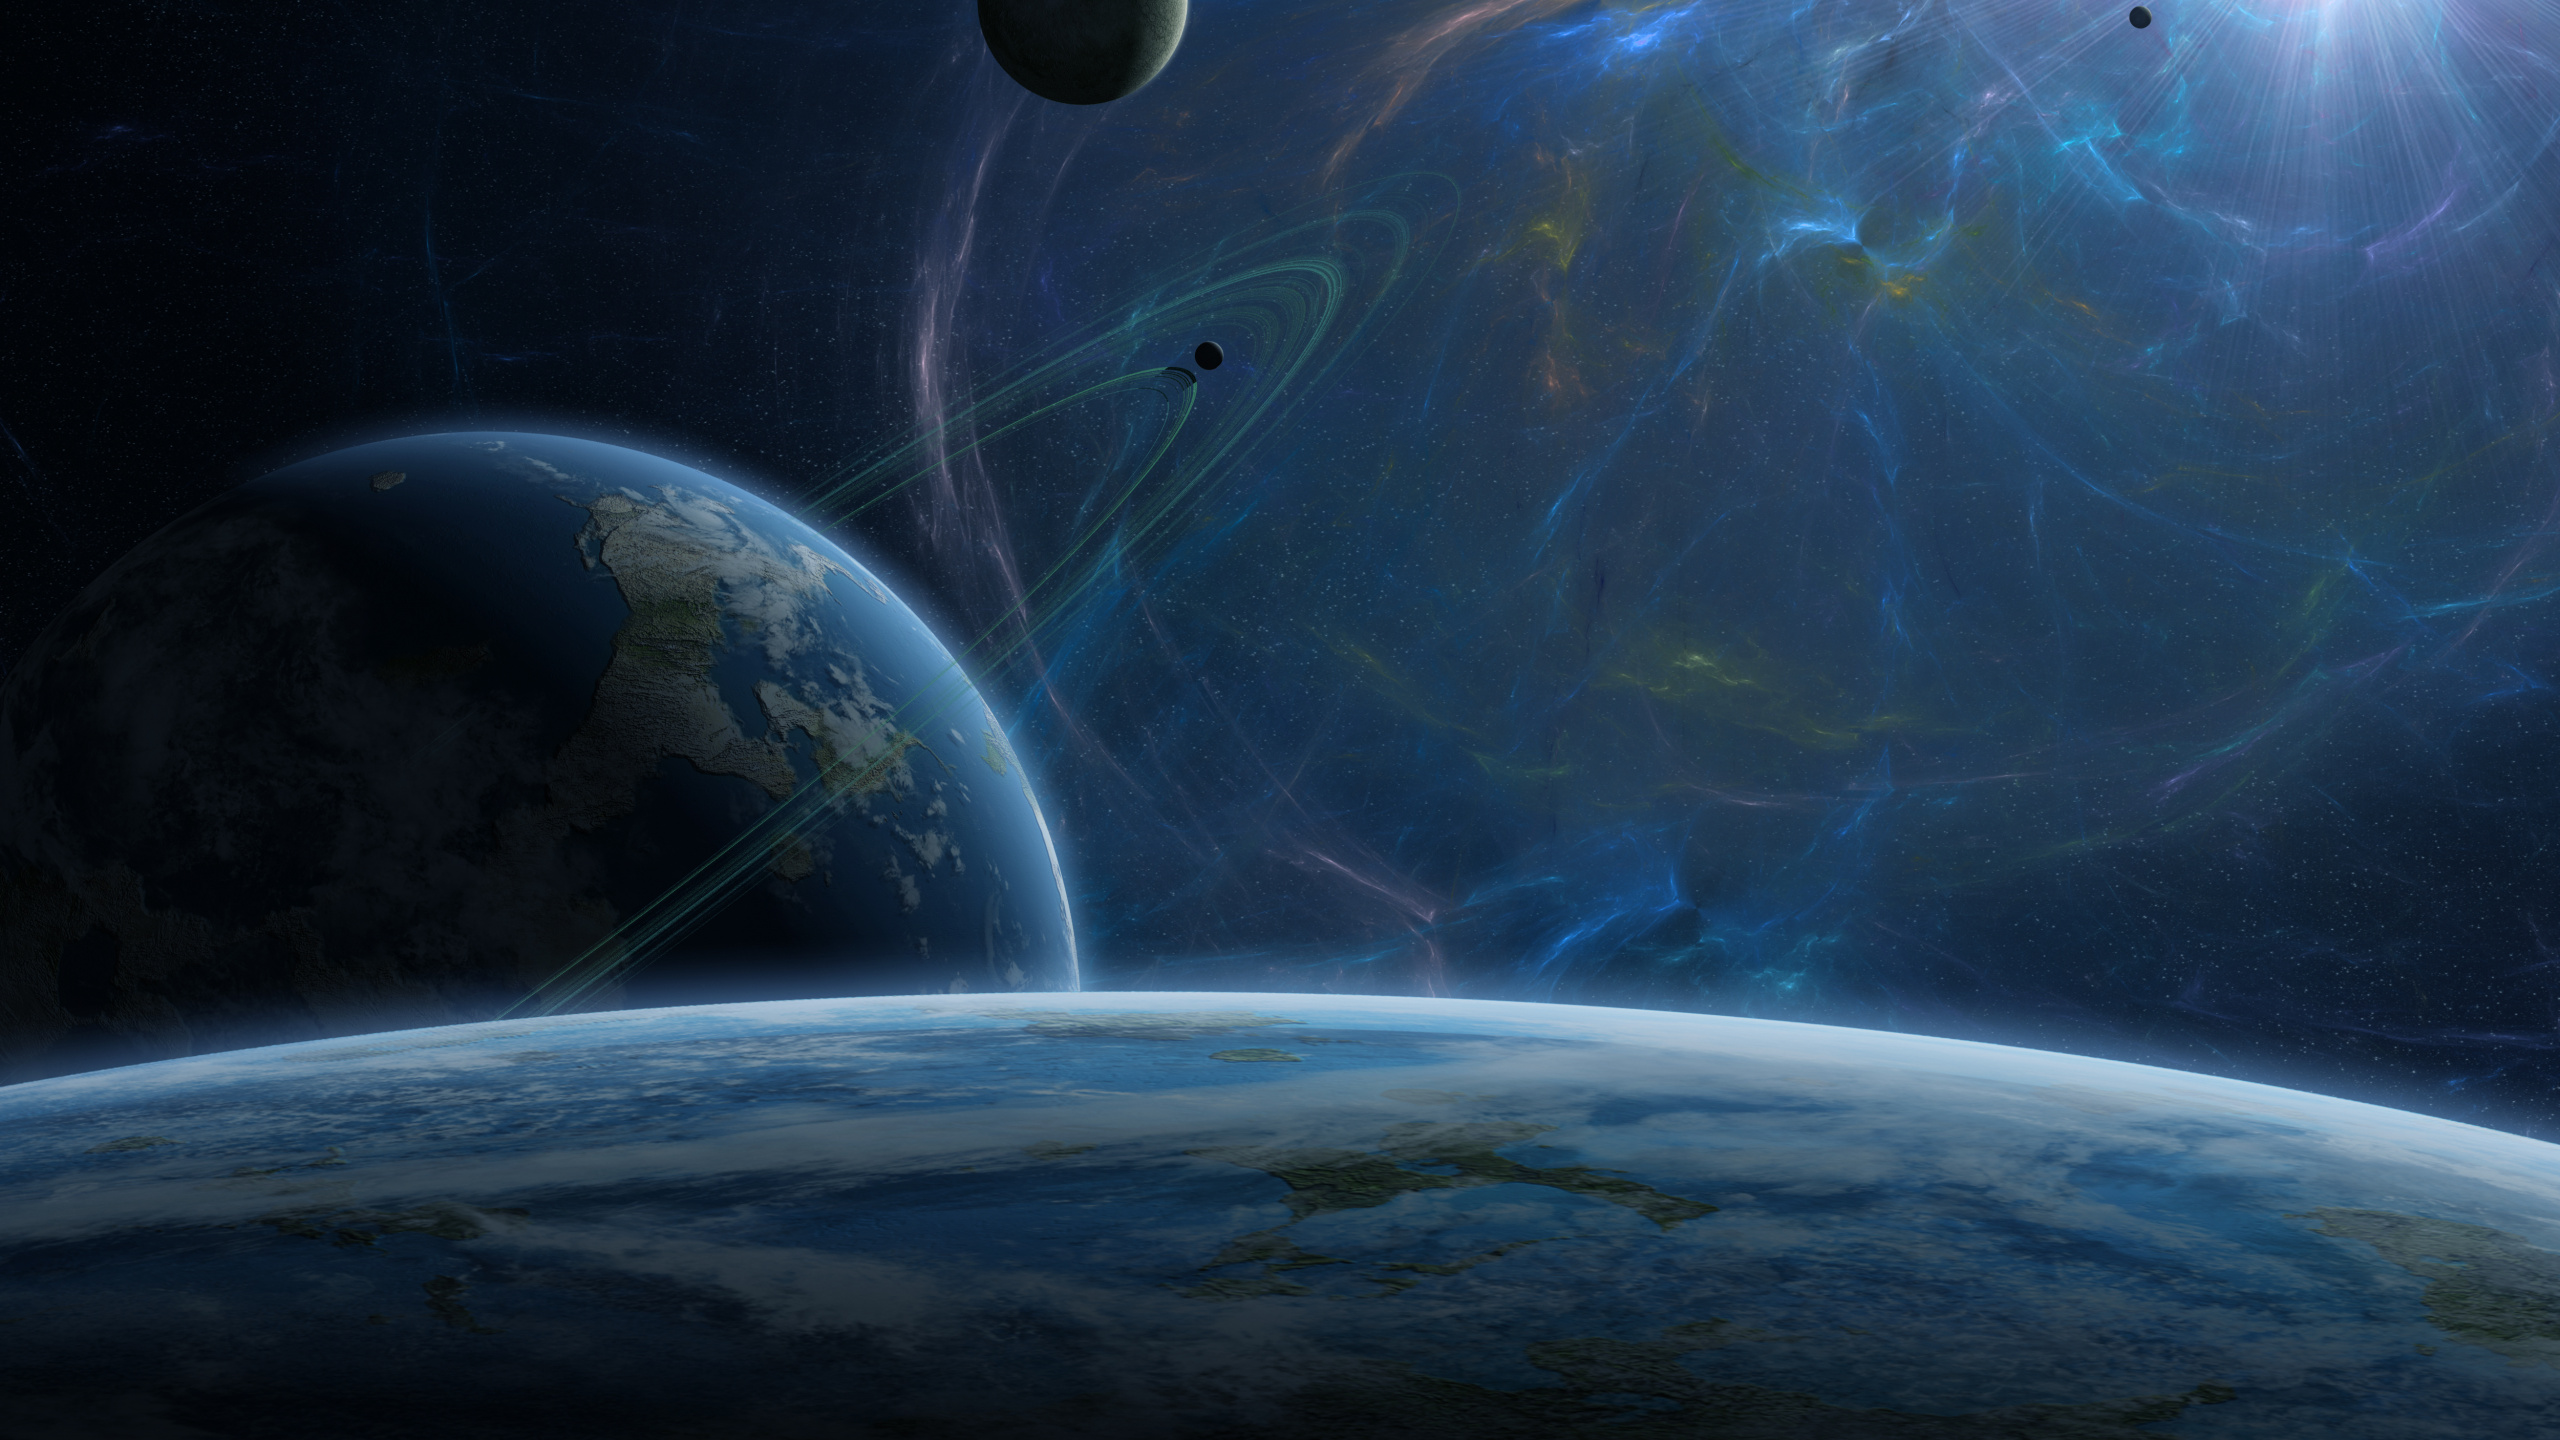 Blue and White Planet Illustration. Wallpaper in 2560x1440 Resolution